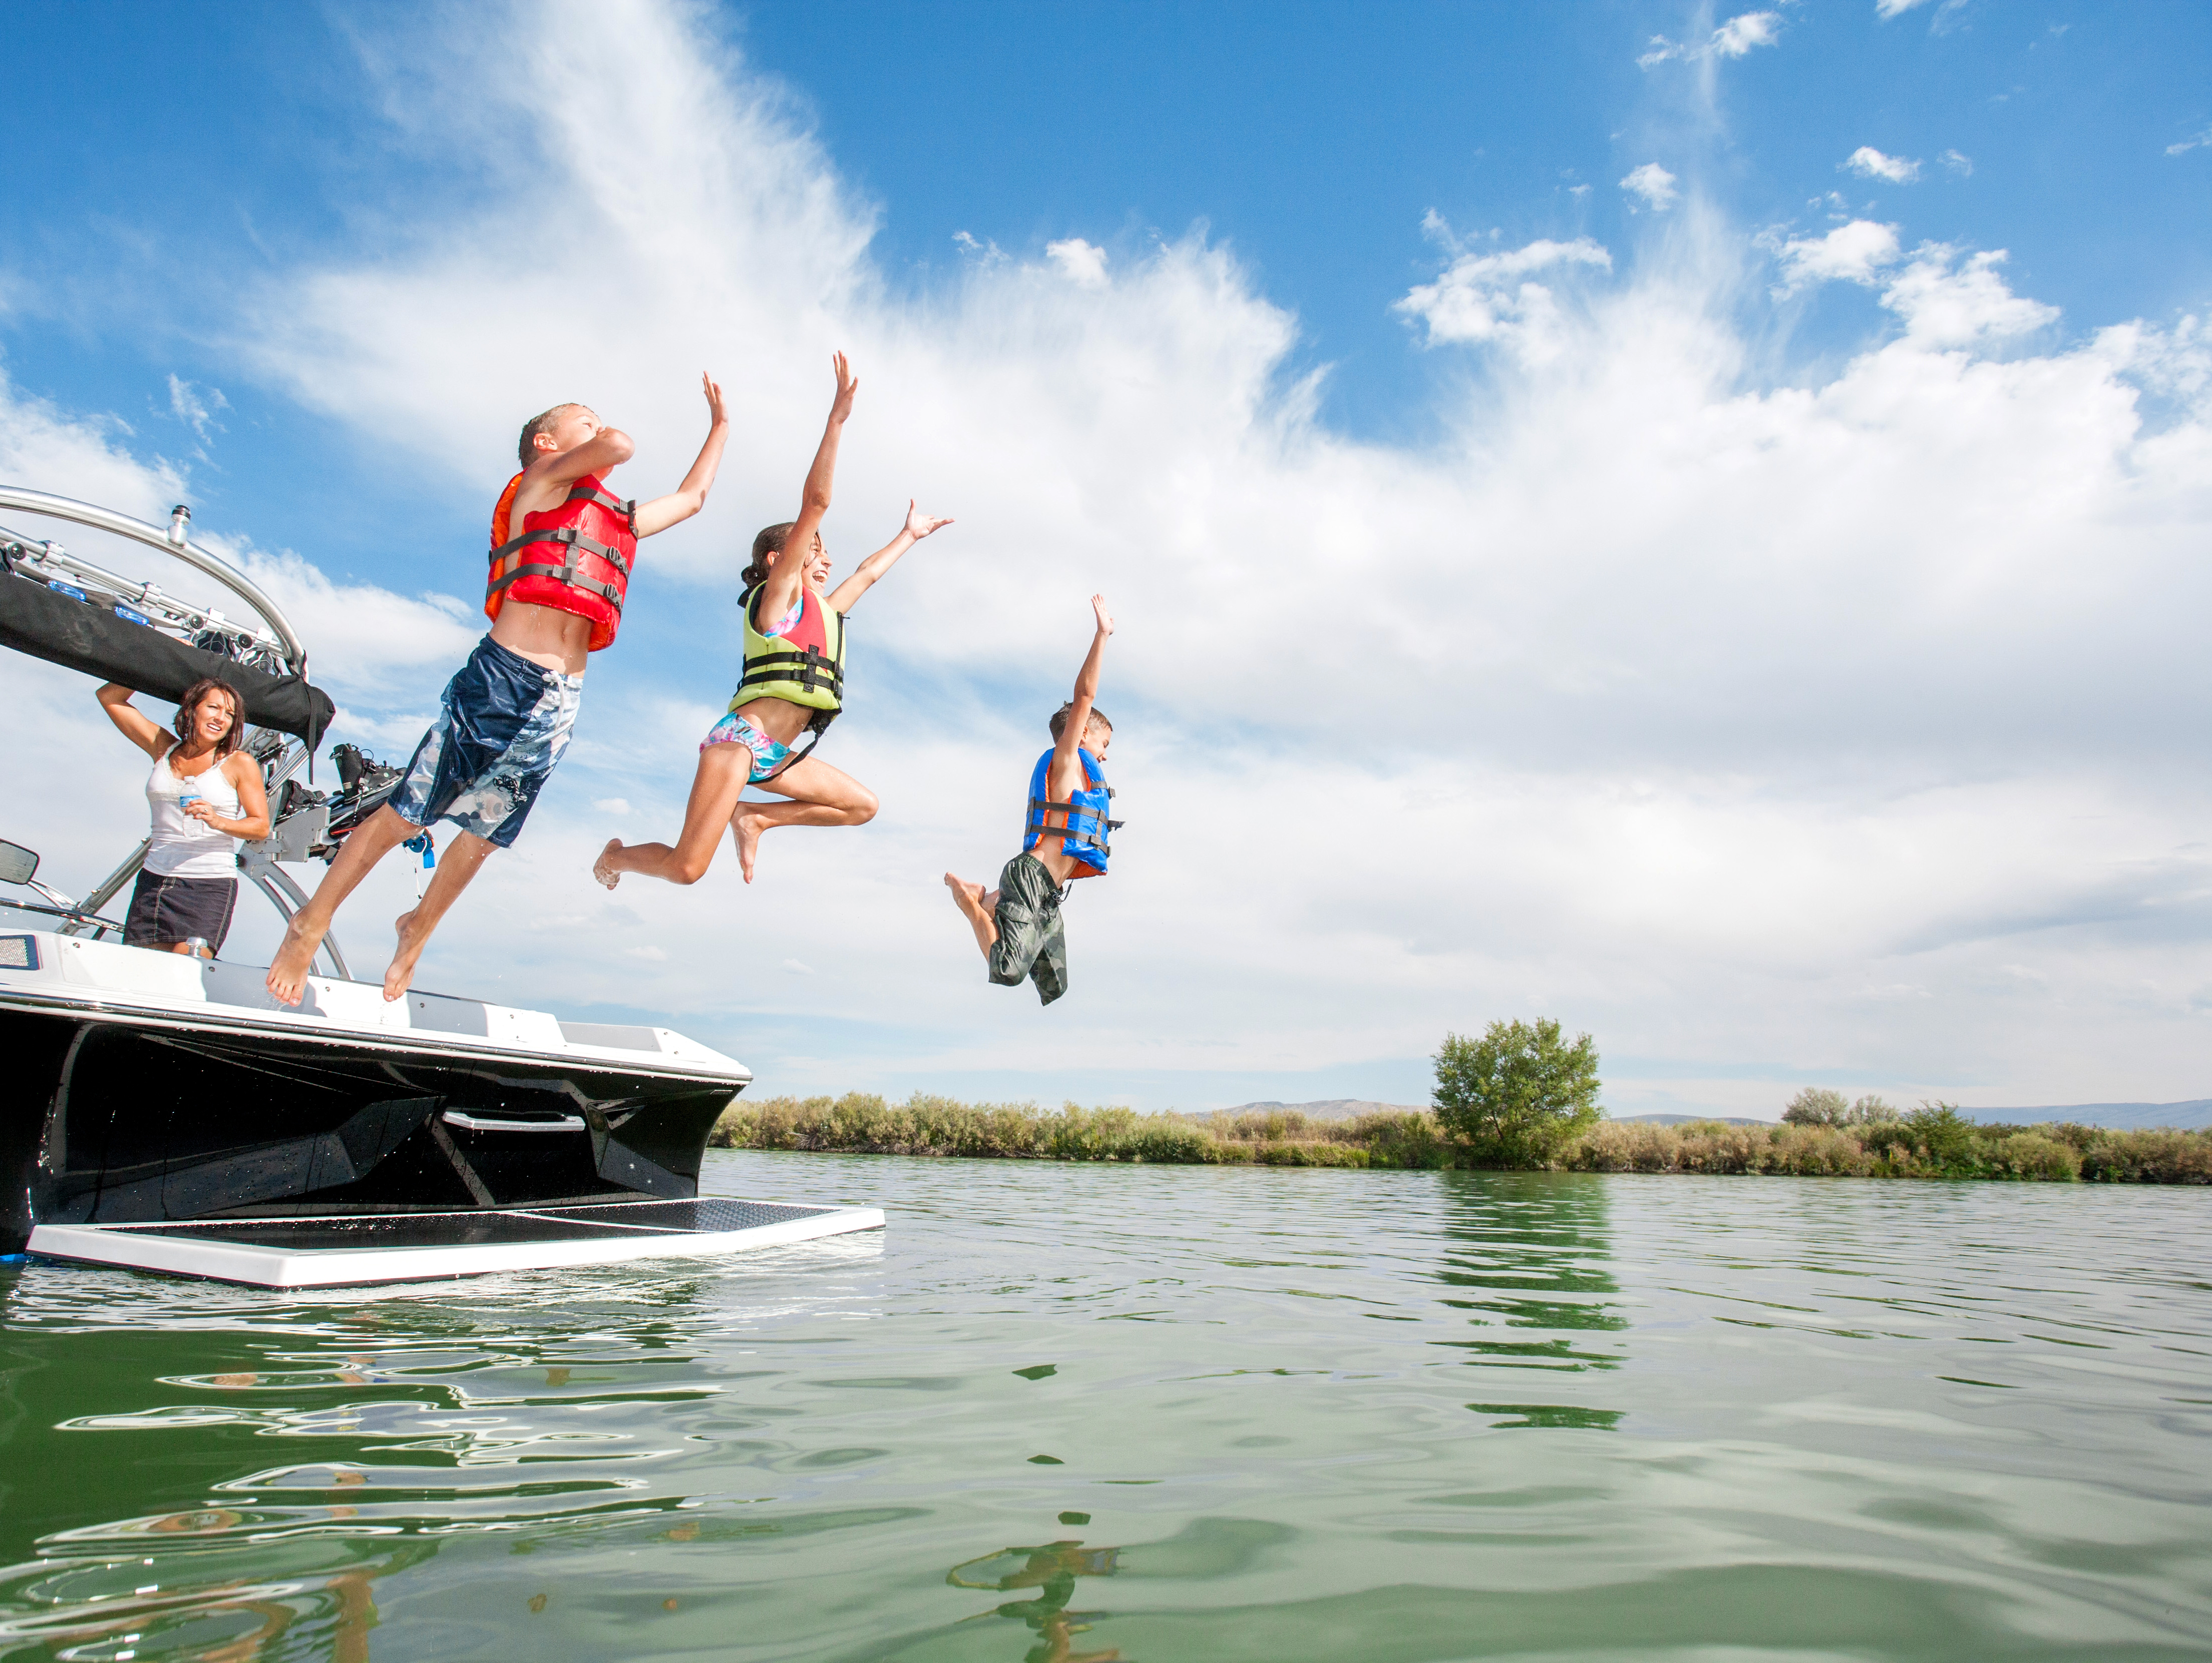 Kids wearing lifejackets jumping in the water from a boat. 